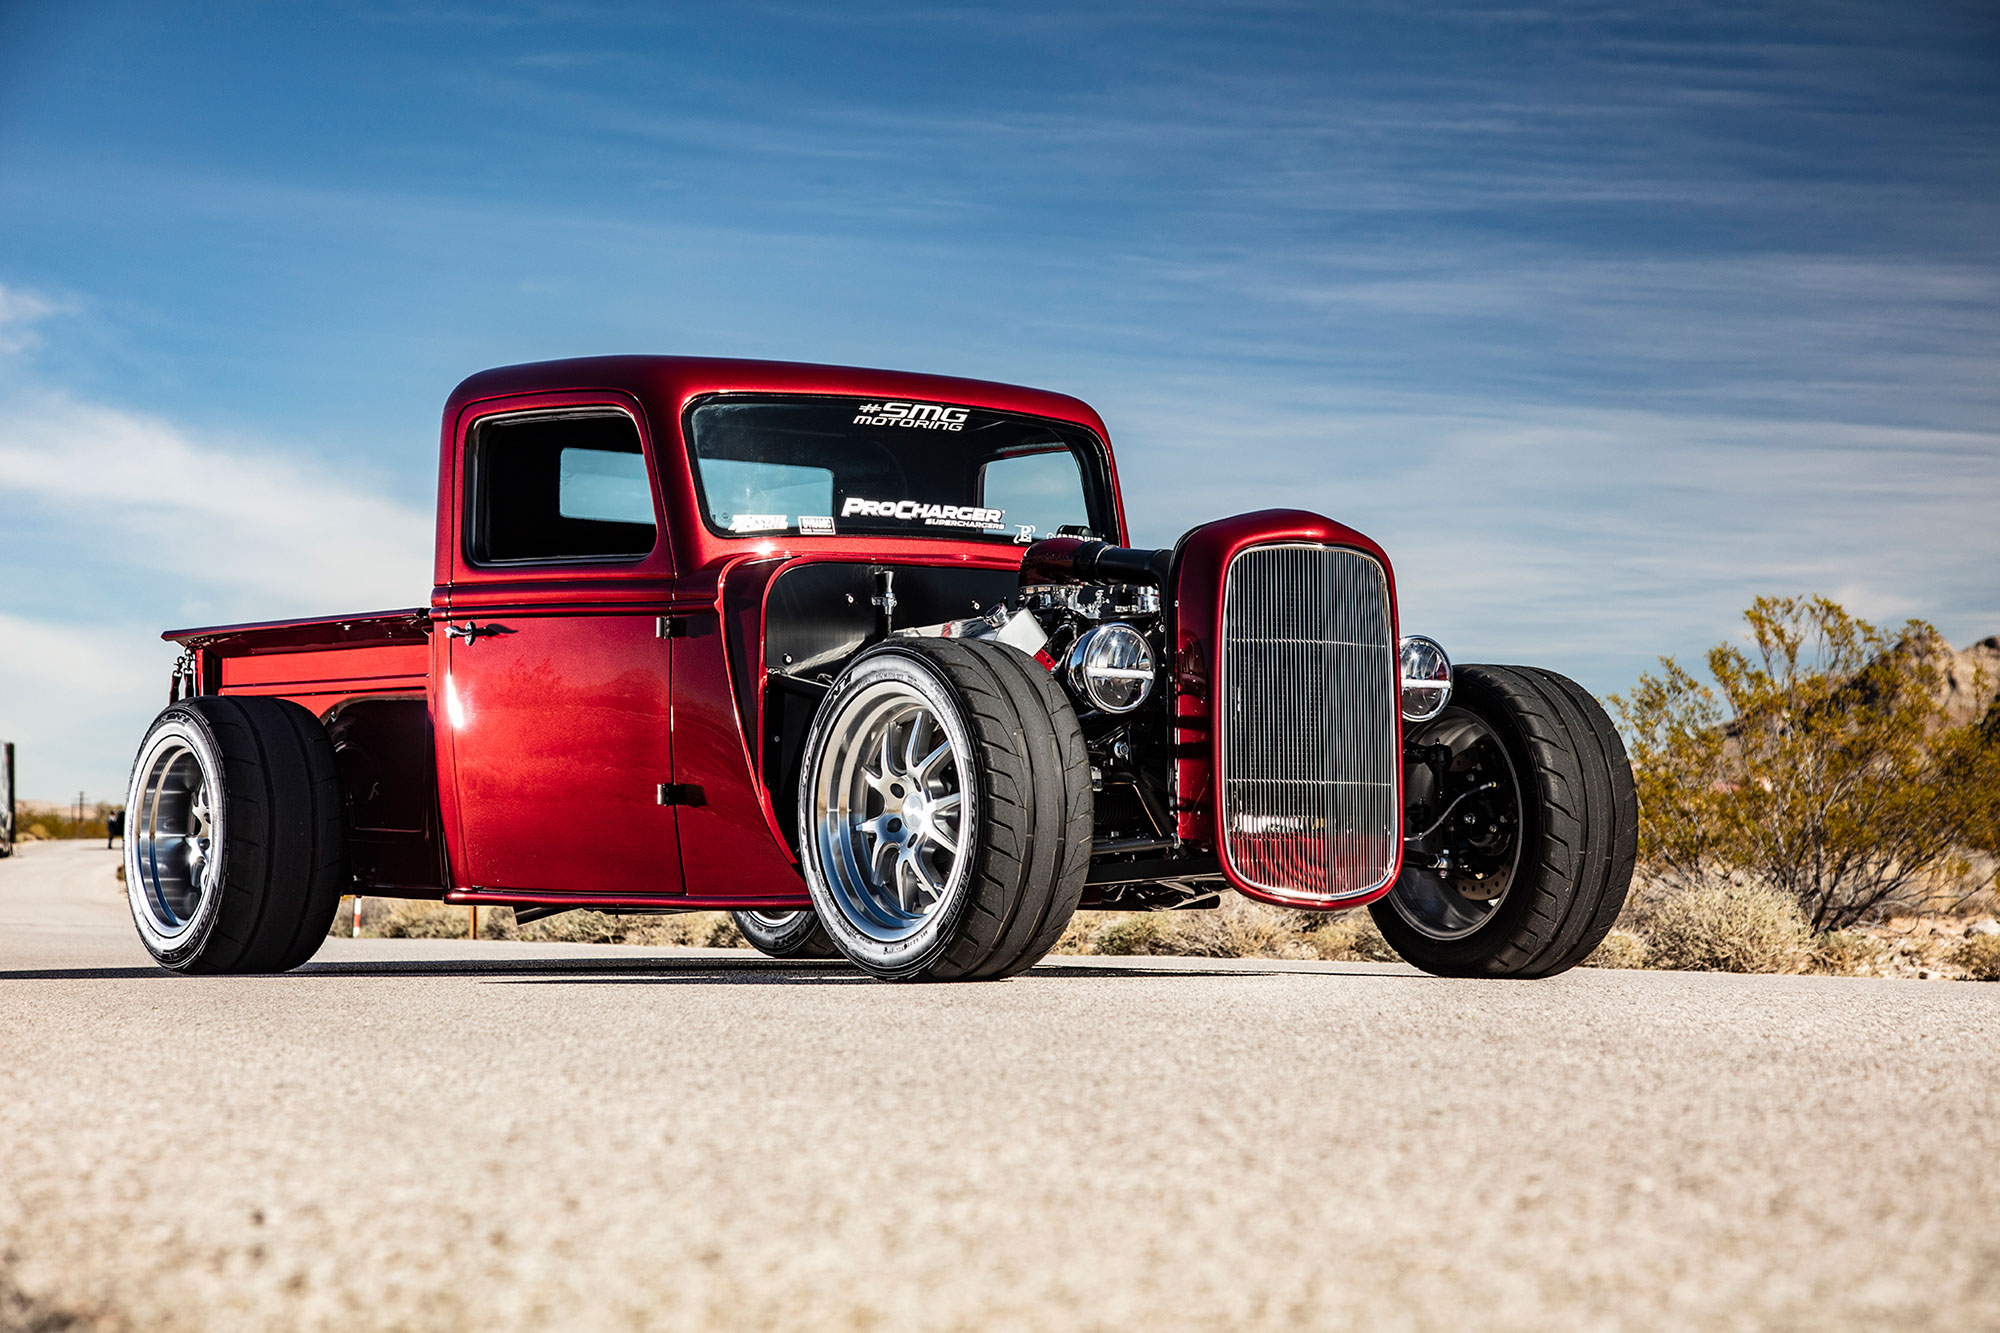 GALLERY Hot Rod Truck Built by Freddy at SMG Motoring.